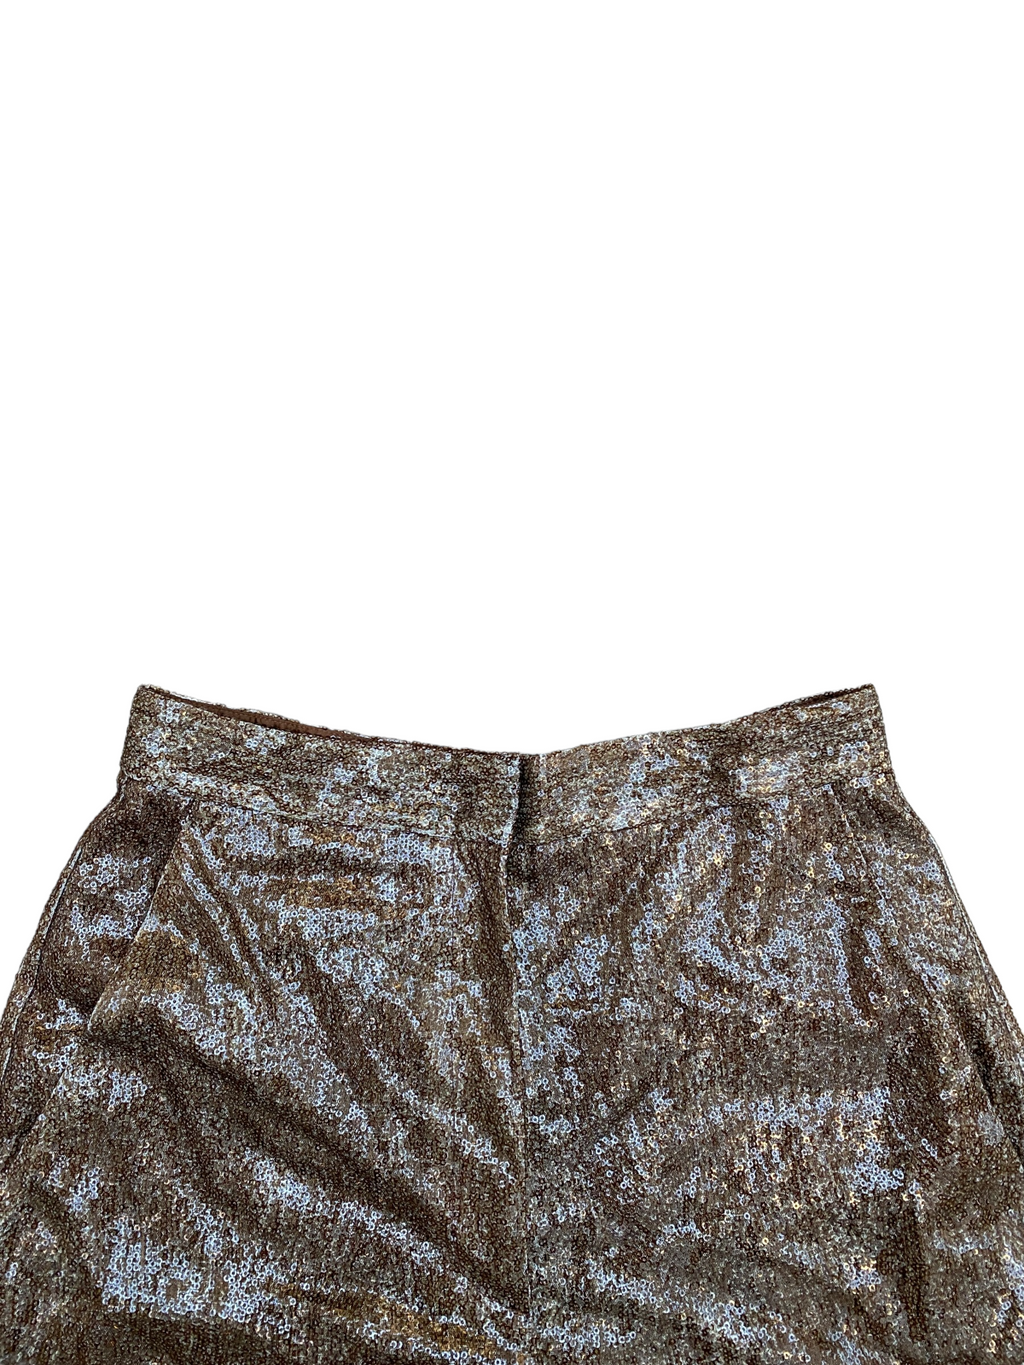 Sequined brown tobacco shorts